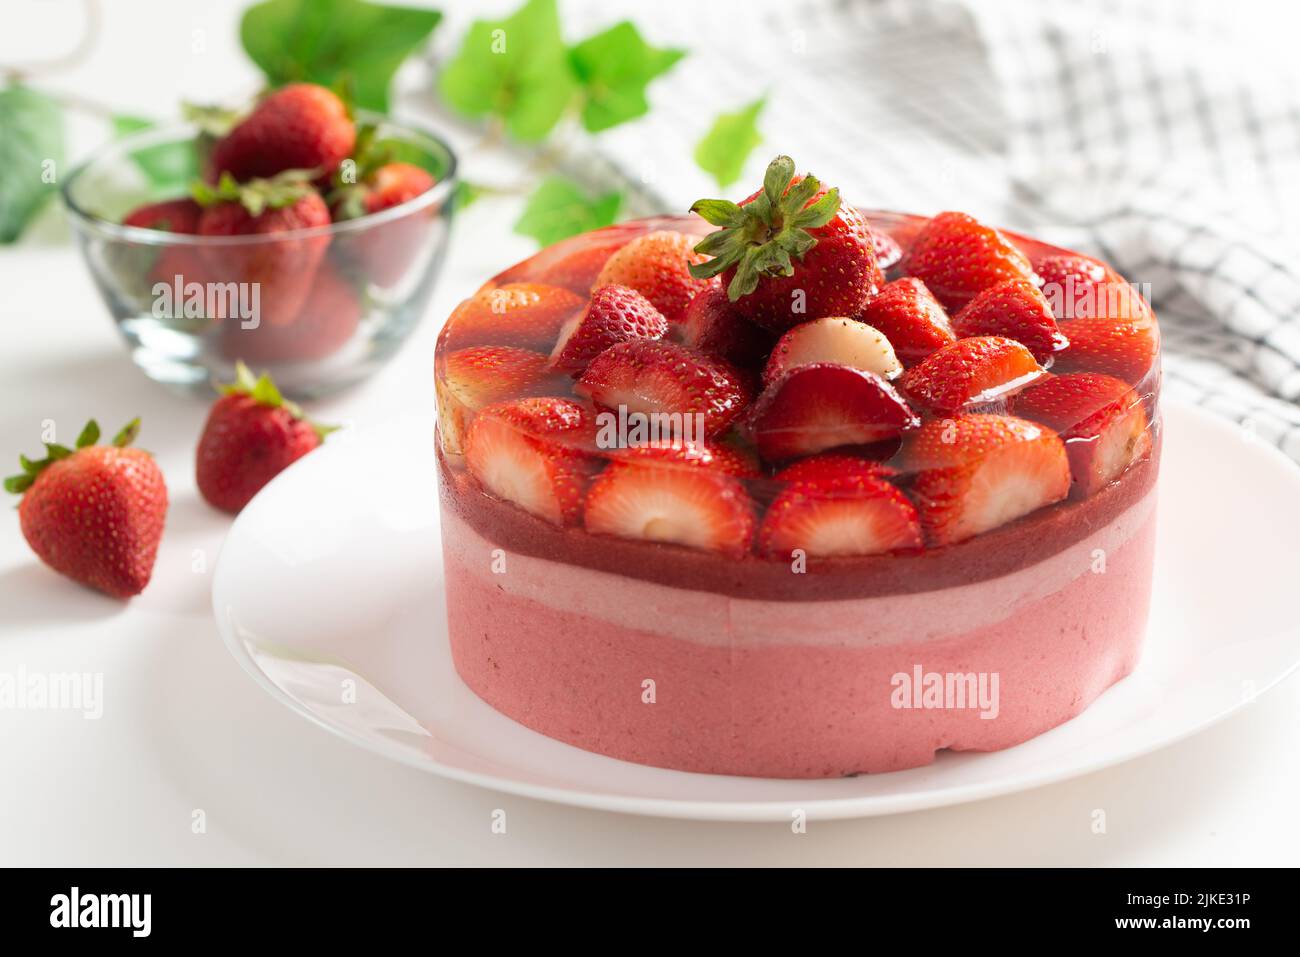 Strawberry cheesecake with jelly and fresh strawberries Stock Photo